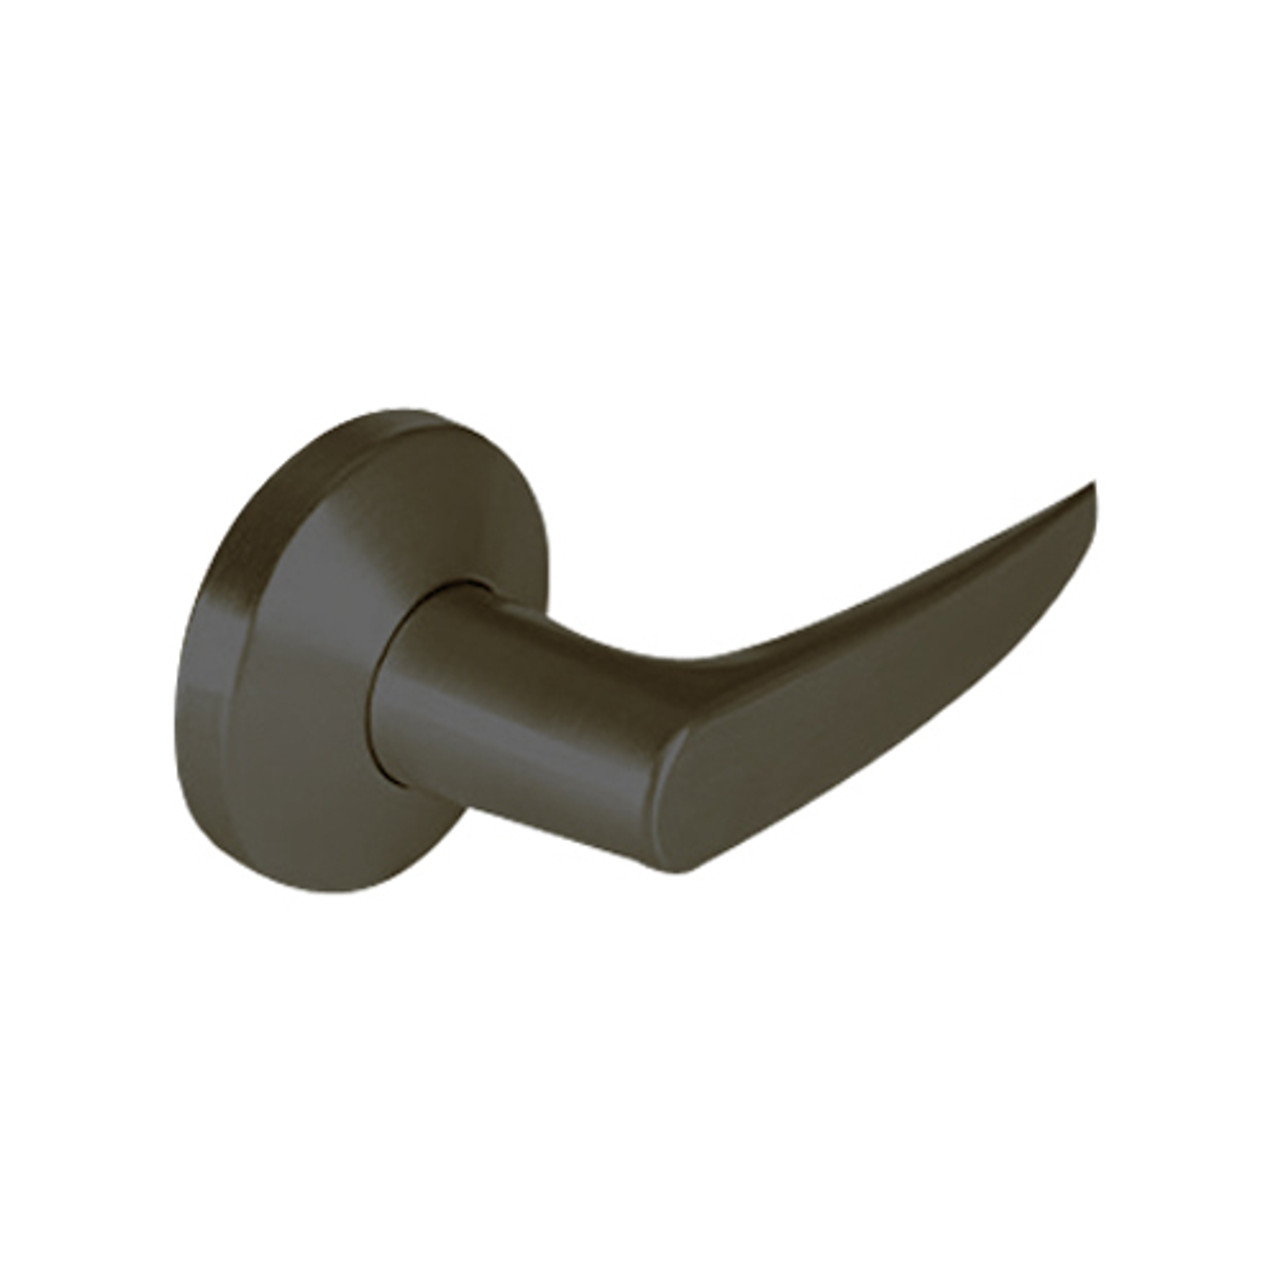 9K30LL16KSTK613 Best 9K Series Hospital Privacy Heavy Duty Cylindrical Lever Locks with Curved Without Return Lever Design in Oil Rubbed Bronze